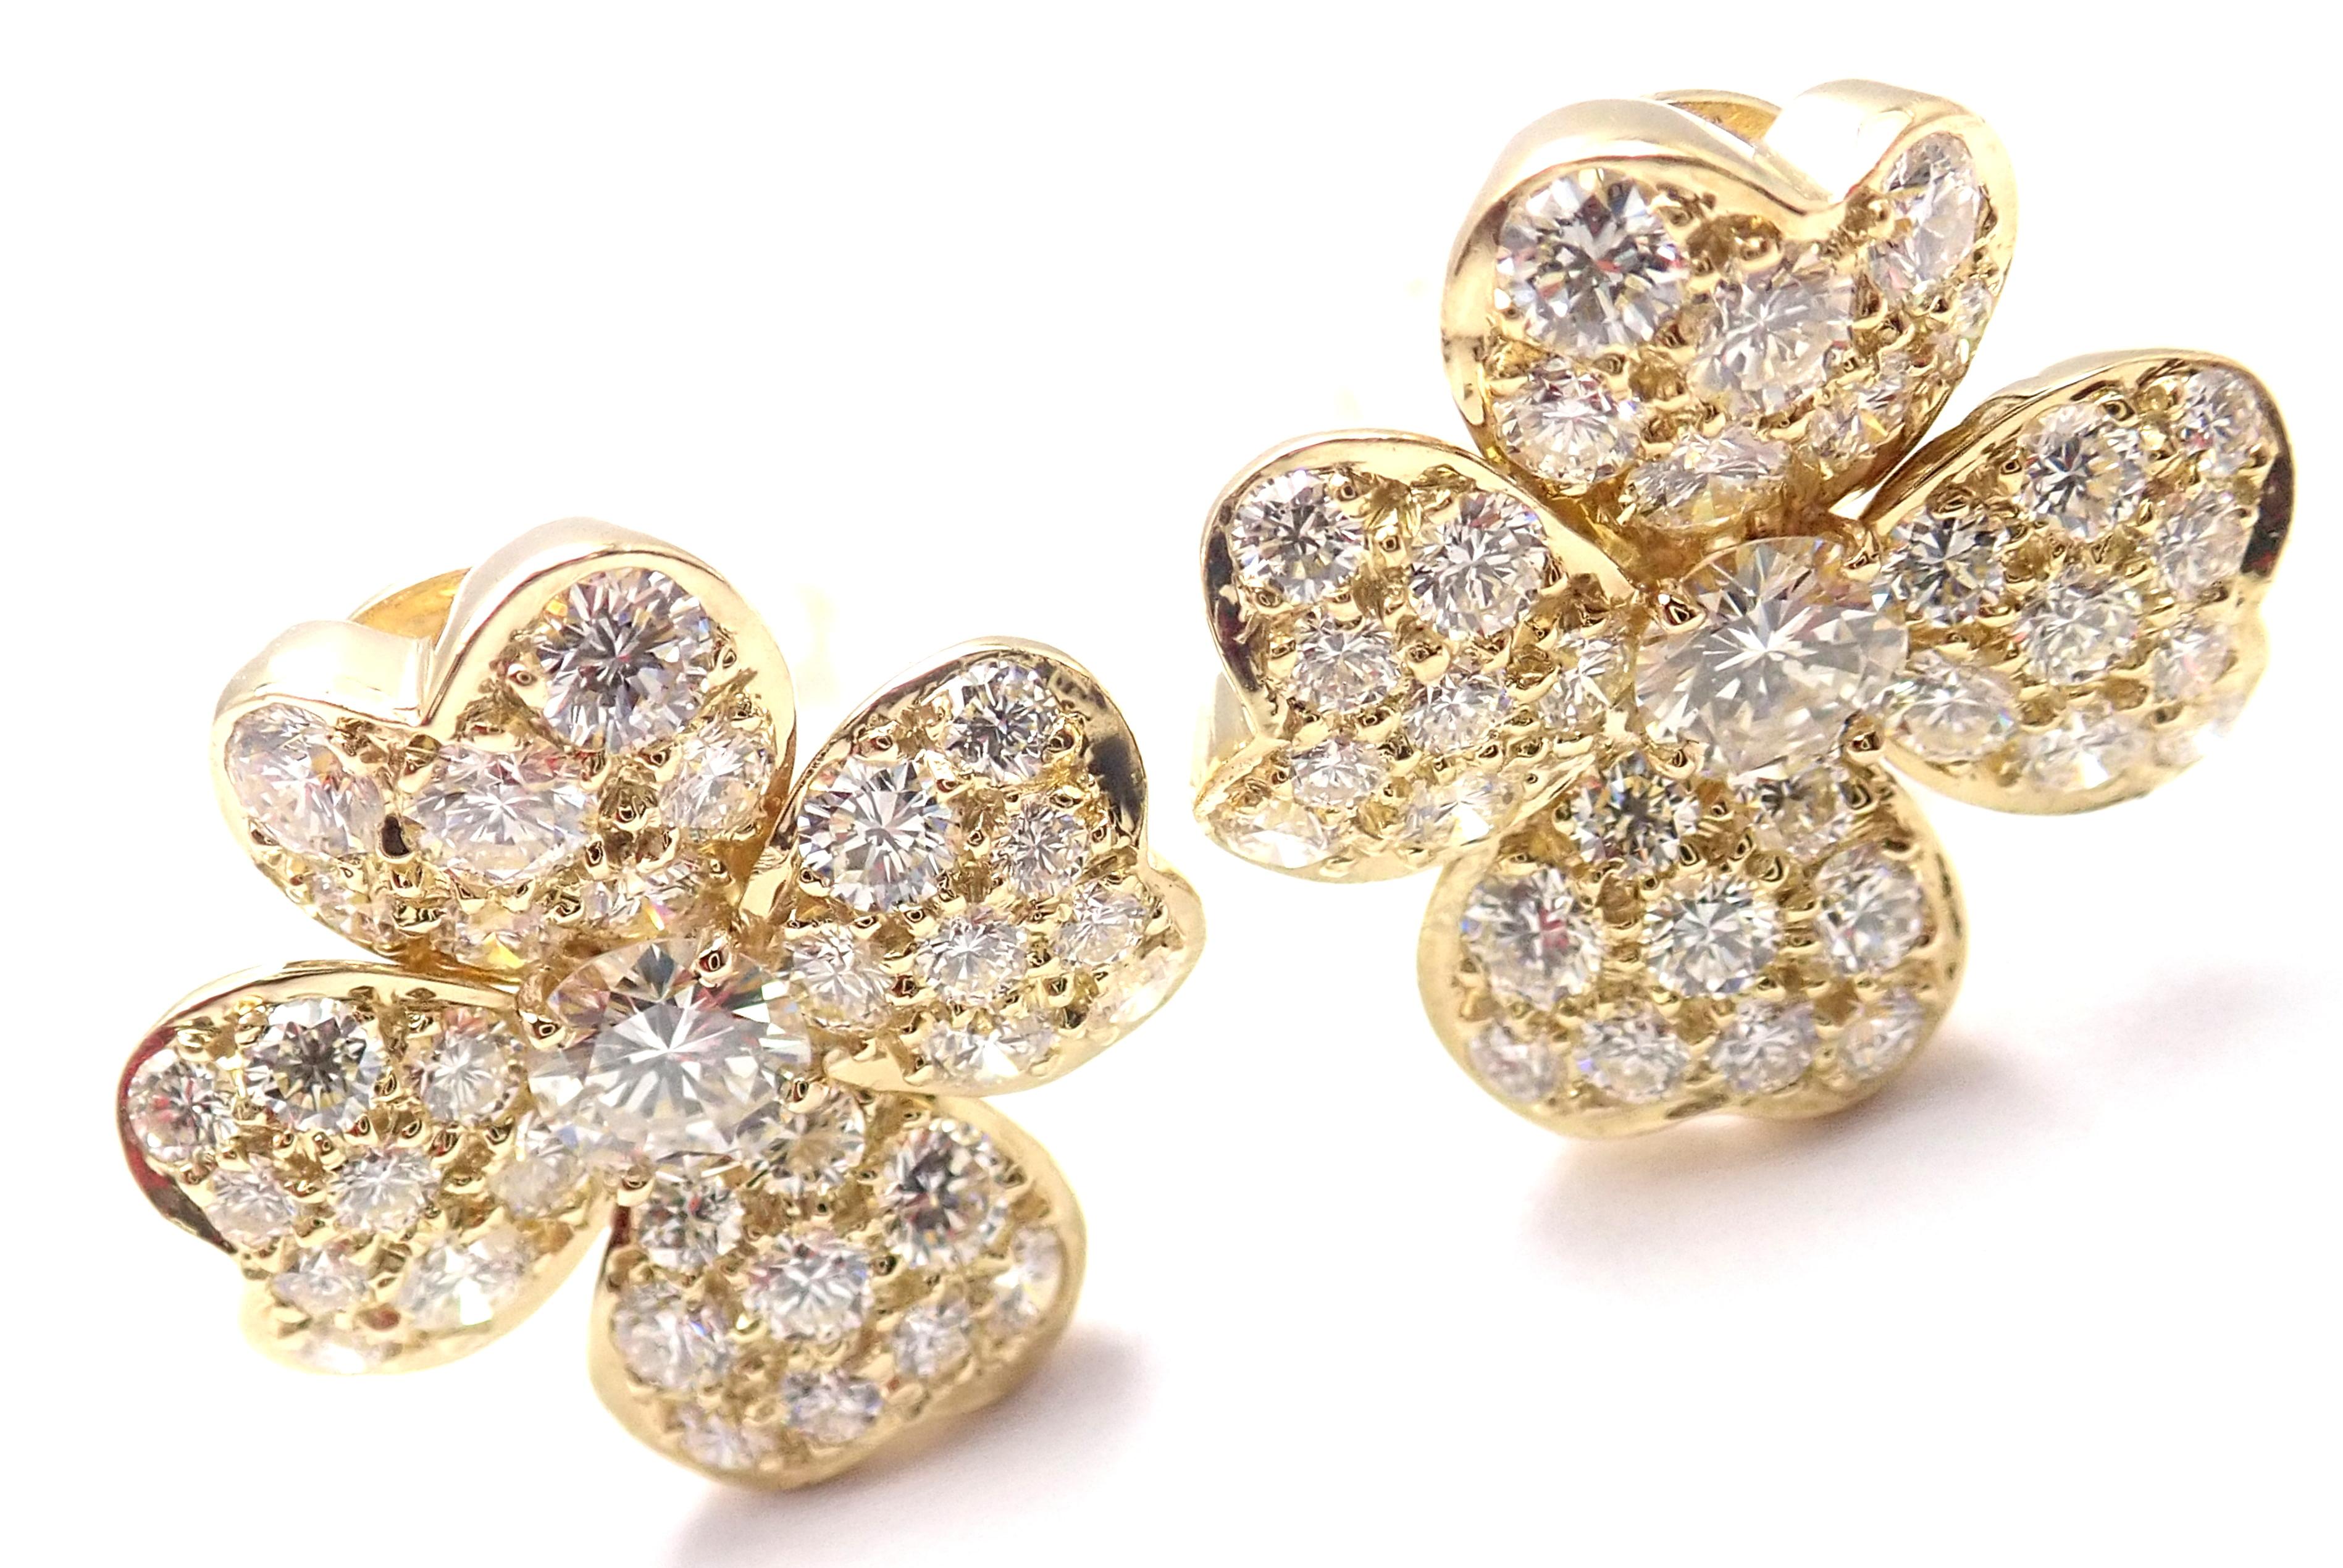 18k Yellow Gold Cosmos Diamond Flower Earrings by Van Cleef & Arpels. 
With 84 round brilliant cut diamonds VVS1 clarity, E color total weight approx. 2.2ct
These earrings come with a VCA box.
***These earrings are for not pierced ears, but they can